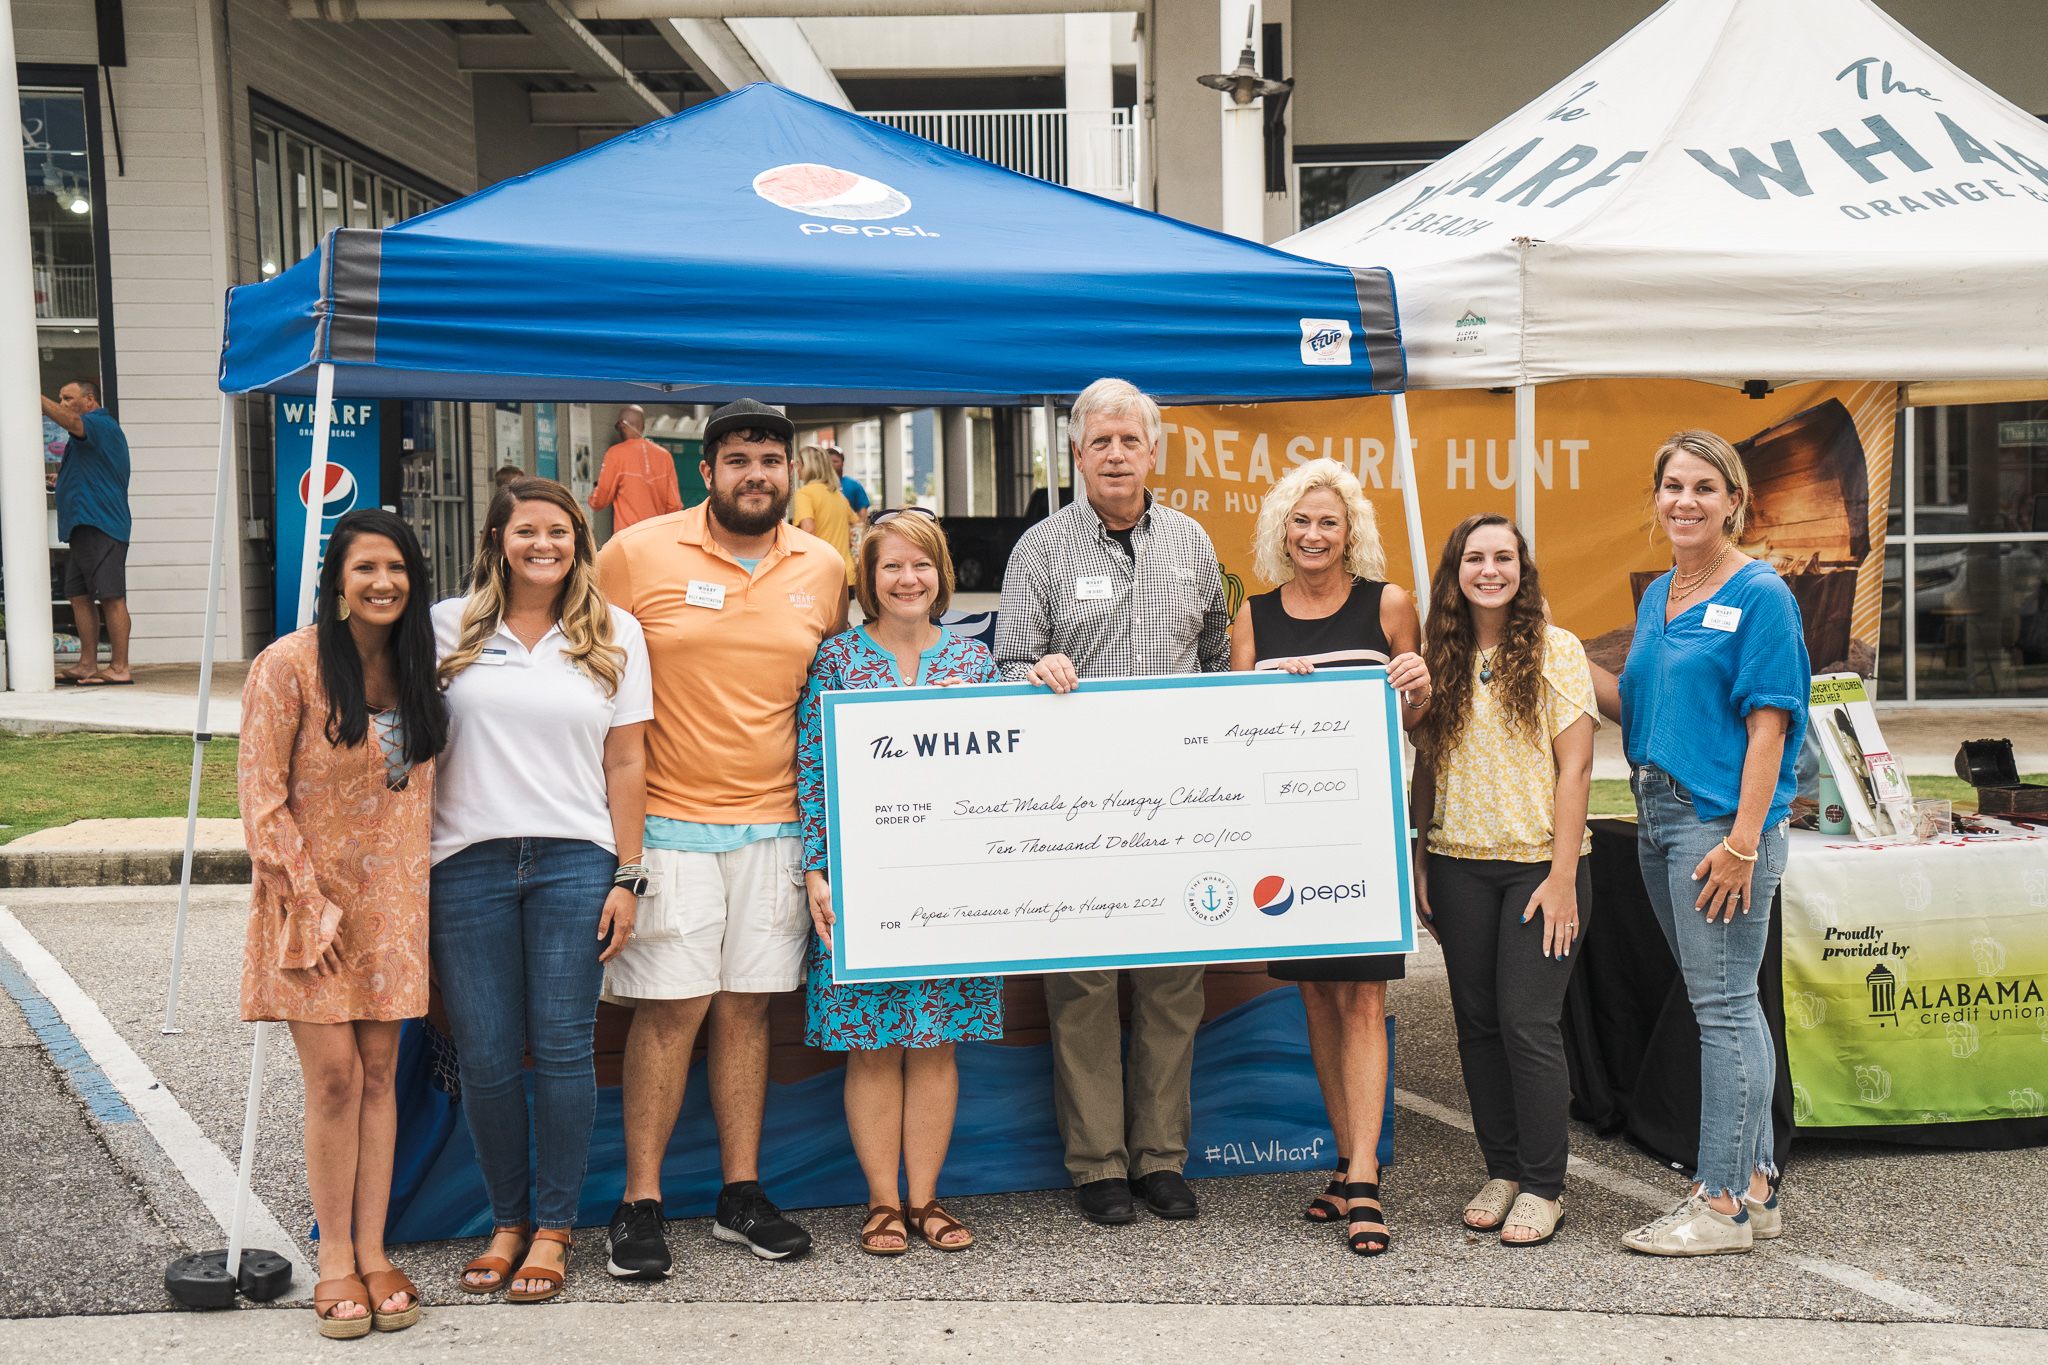 The Wharf, Pepsi Donate $10k to Help Feed Hungry Children in Alabama